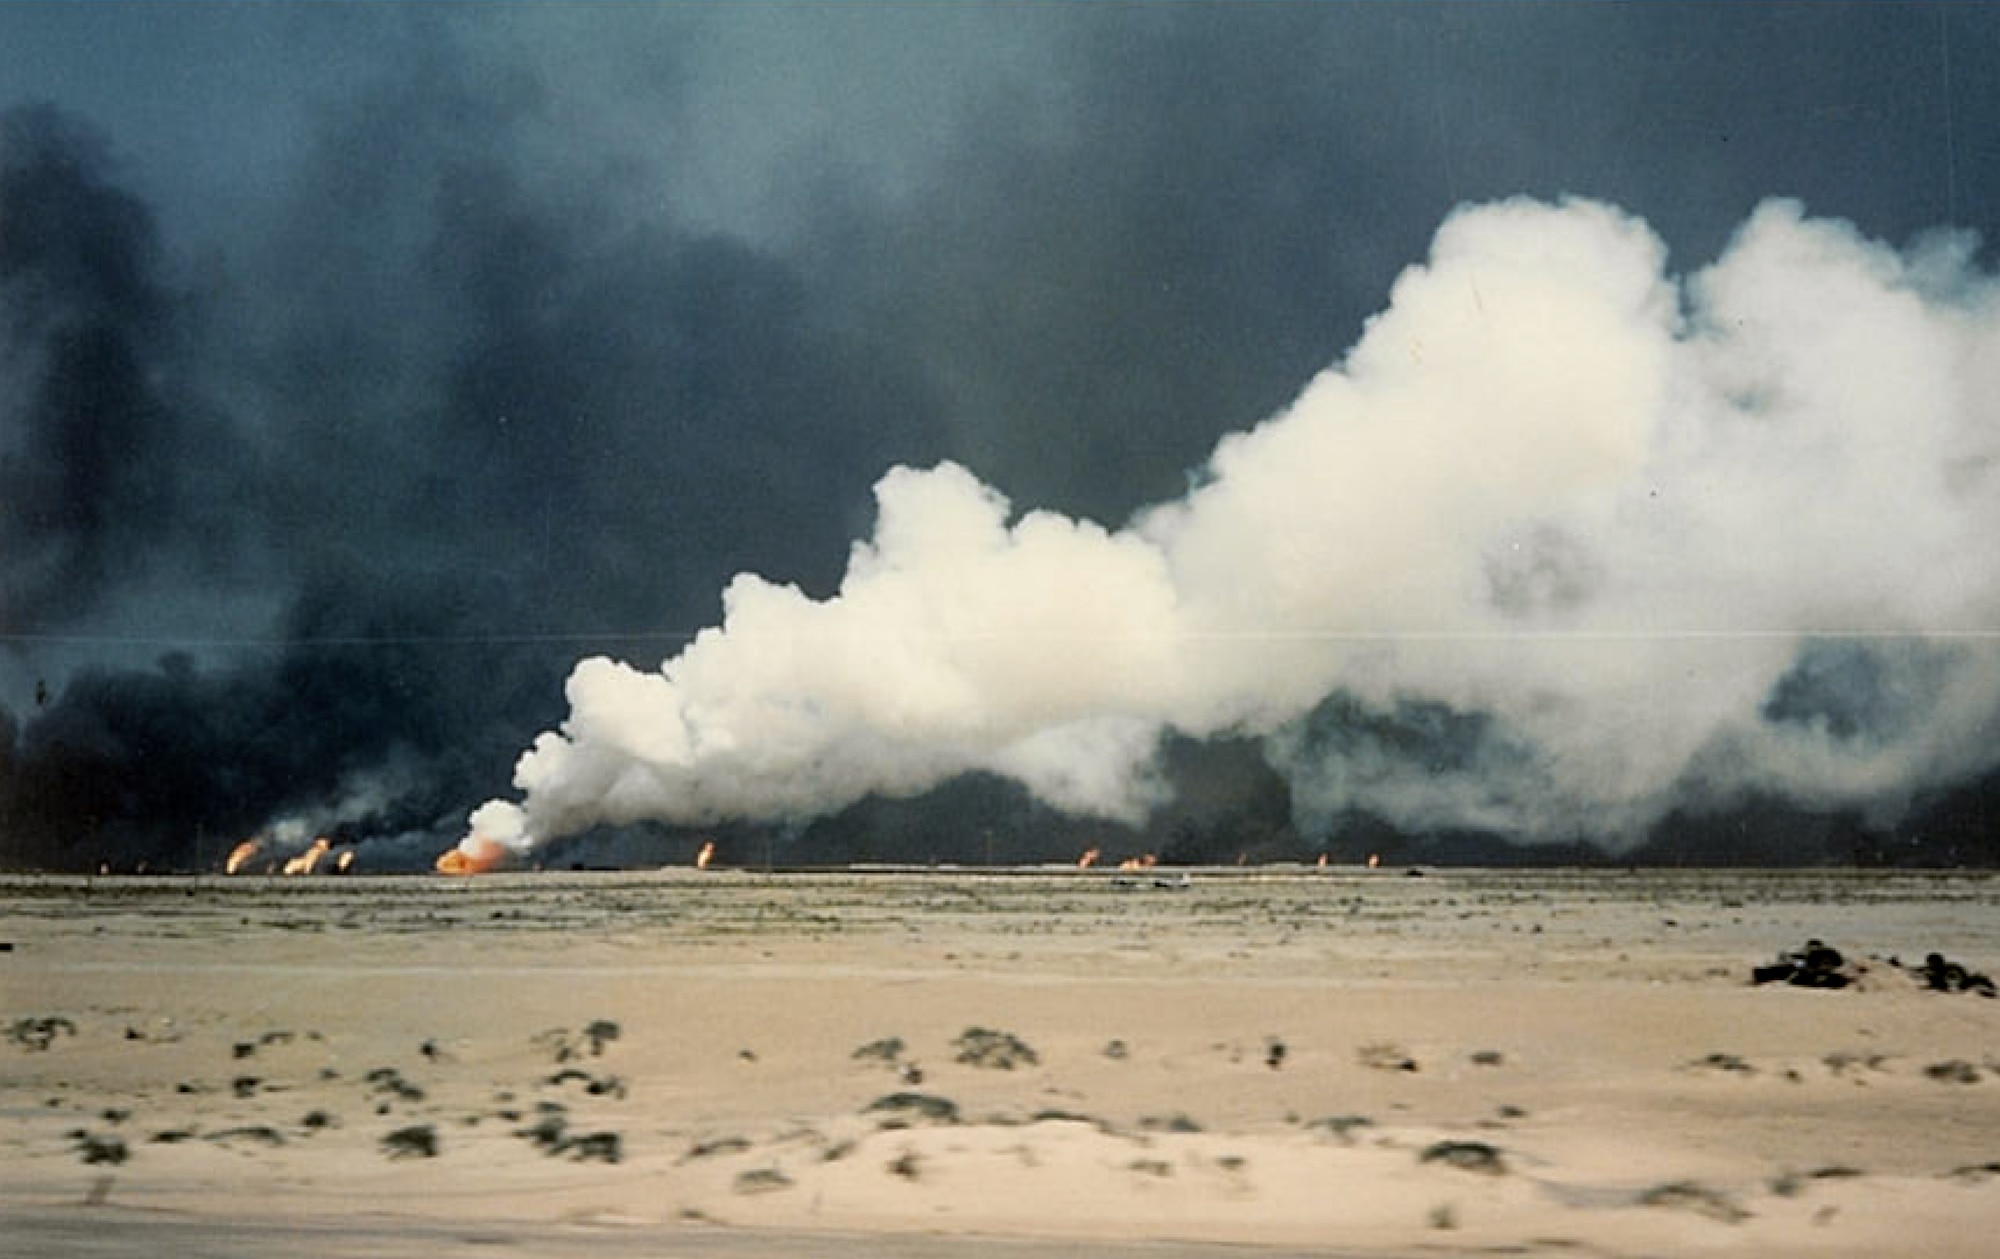 As Operation Desert Storm coalition forces advanced into Kuwait, the Iraqi military forces set fire to hundreds of oil wells as they retreated in January and February 1991. Then 20-year-old Airman 1st Class Jay Latham was a weather observer assigned to King Fahd Air Base, Dharan, Saudi Arabia, and took frequent weather observations during this time, especially prior to the launching of F-16 Falcons and A-10 Thunderbolt IIs. Latham is now a senior master sergeant in the Air Force Reserve assigned to the 403rd Wing's 53rd Weather Reconnaissance Squadron at Keesler Air Force Base, Mississippi. (Courtesy photo)